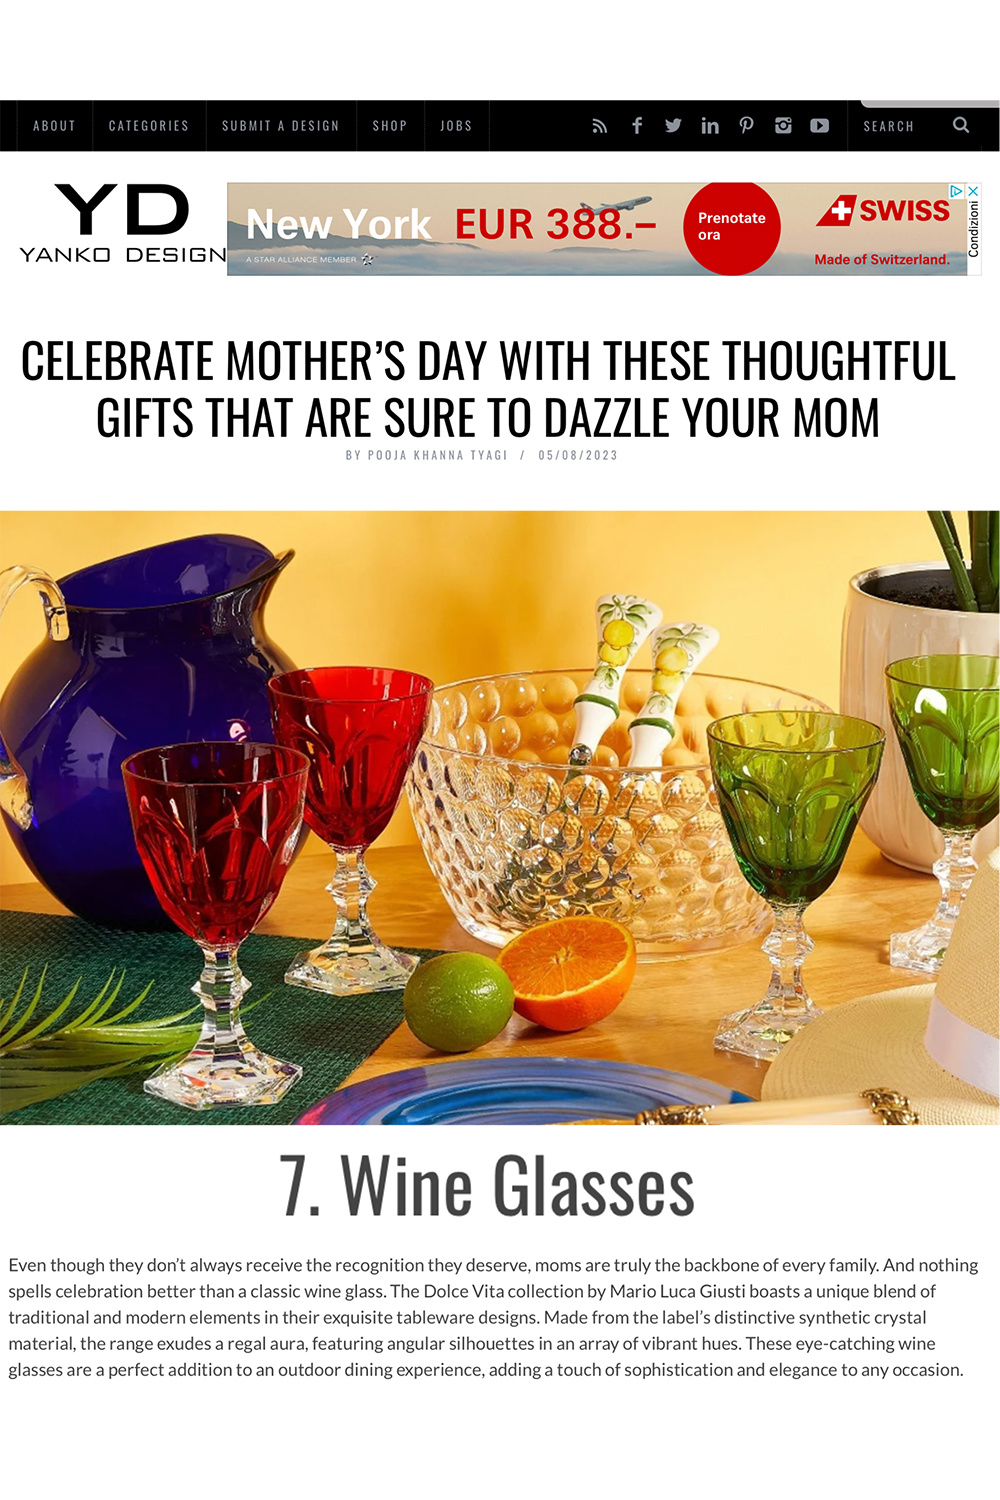 Gelebrate Mother's day with these thoughtful gifts that are sure to dazzle your mom 